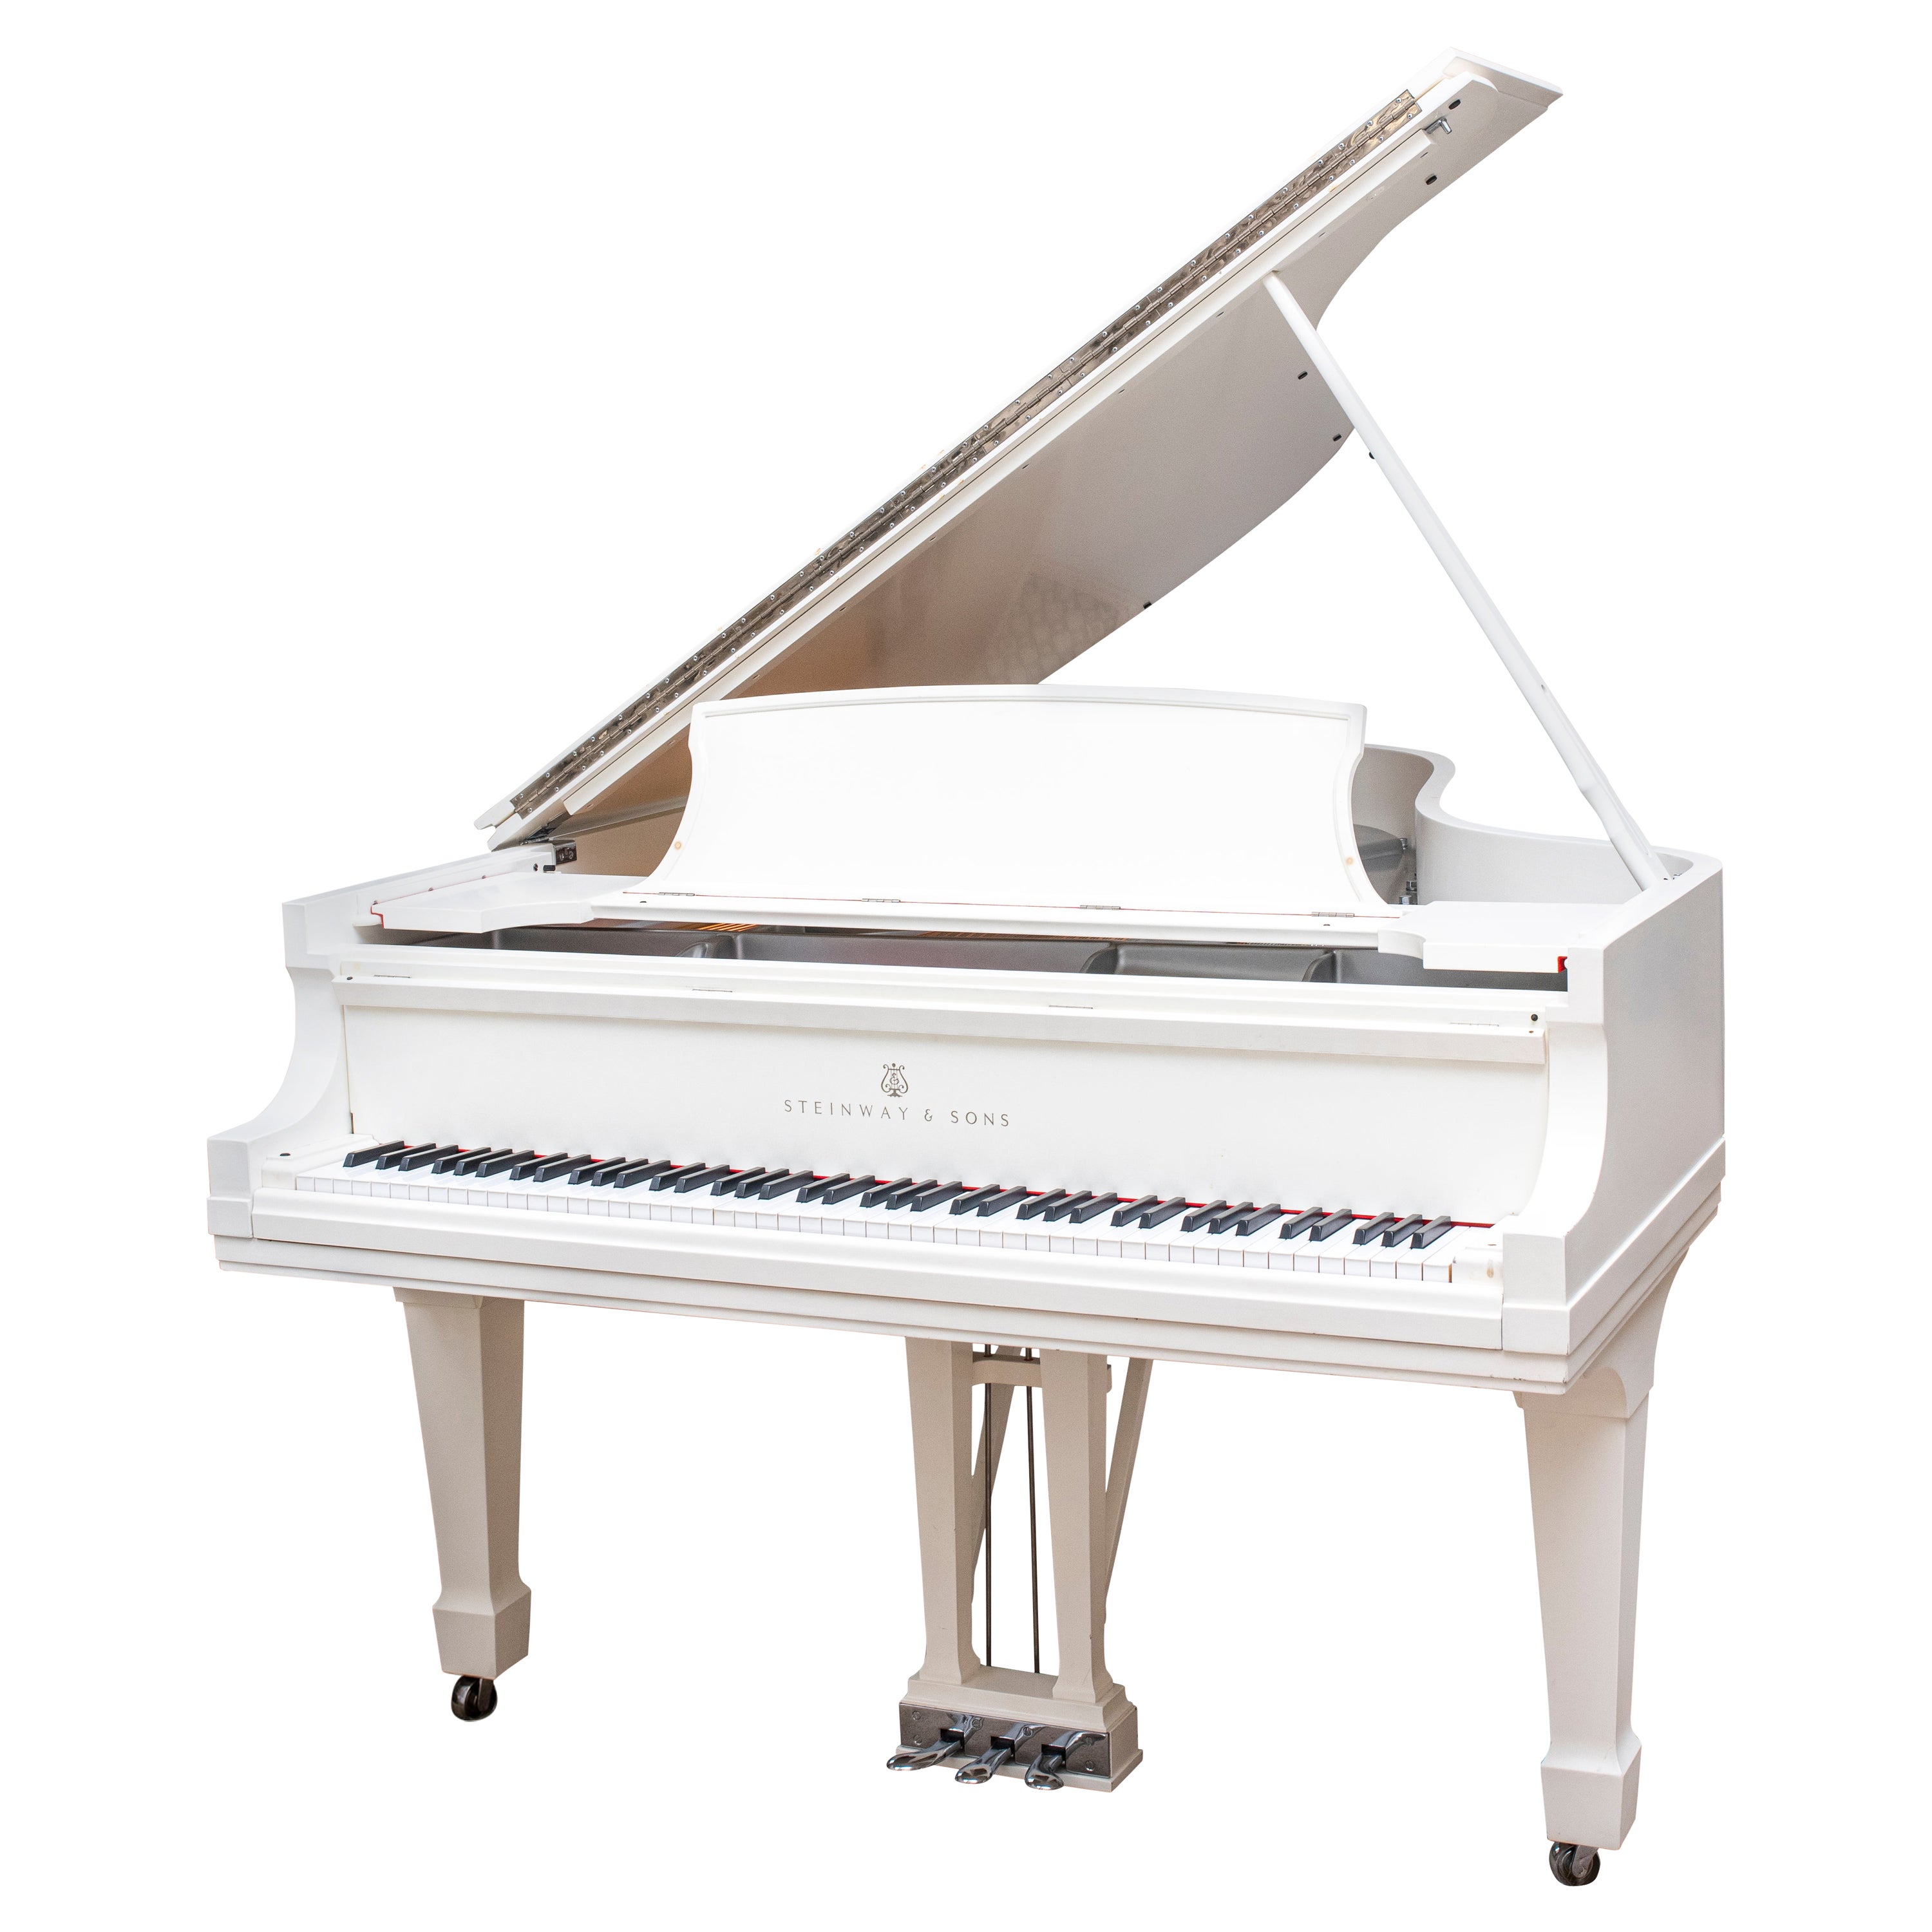 Steinway B Grand Piano in White Lacquer